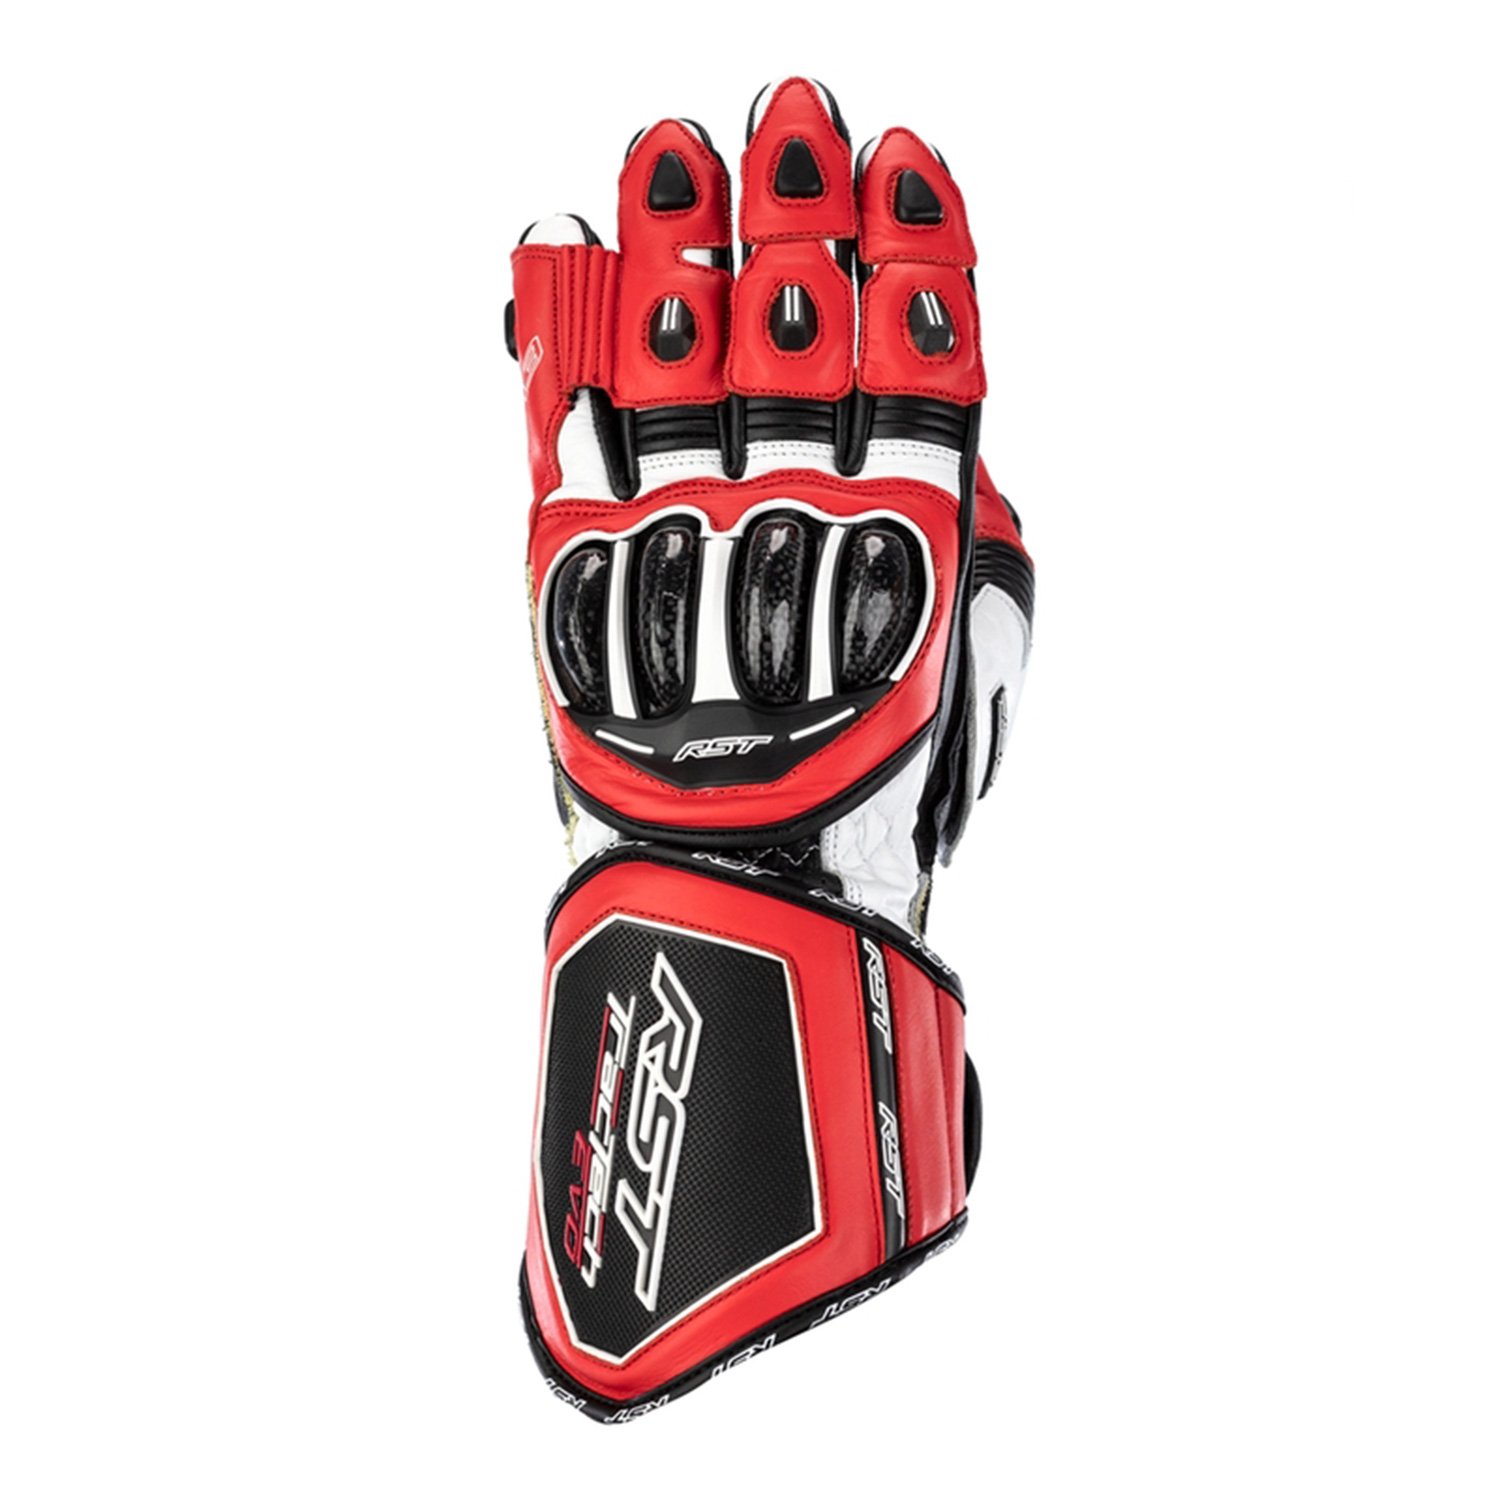 Image of RST Tractech Evo 4 Ce Mens Glove Red Black White Size 8 EN